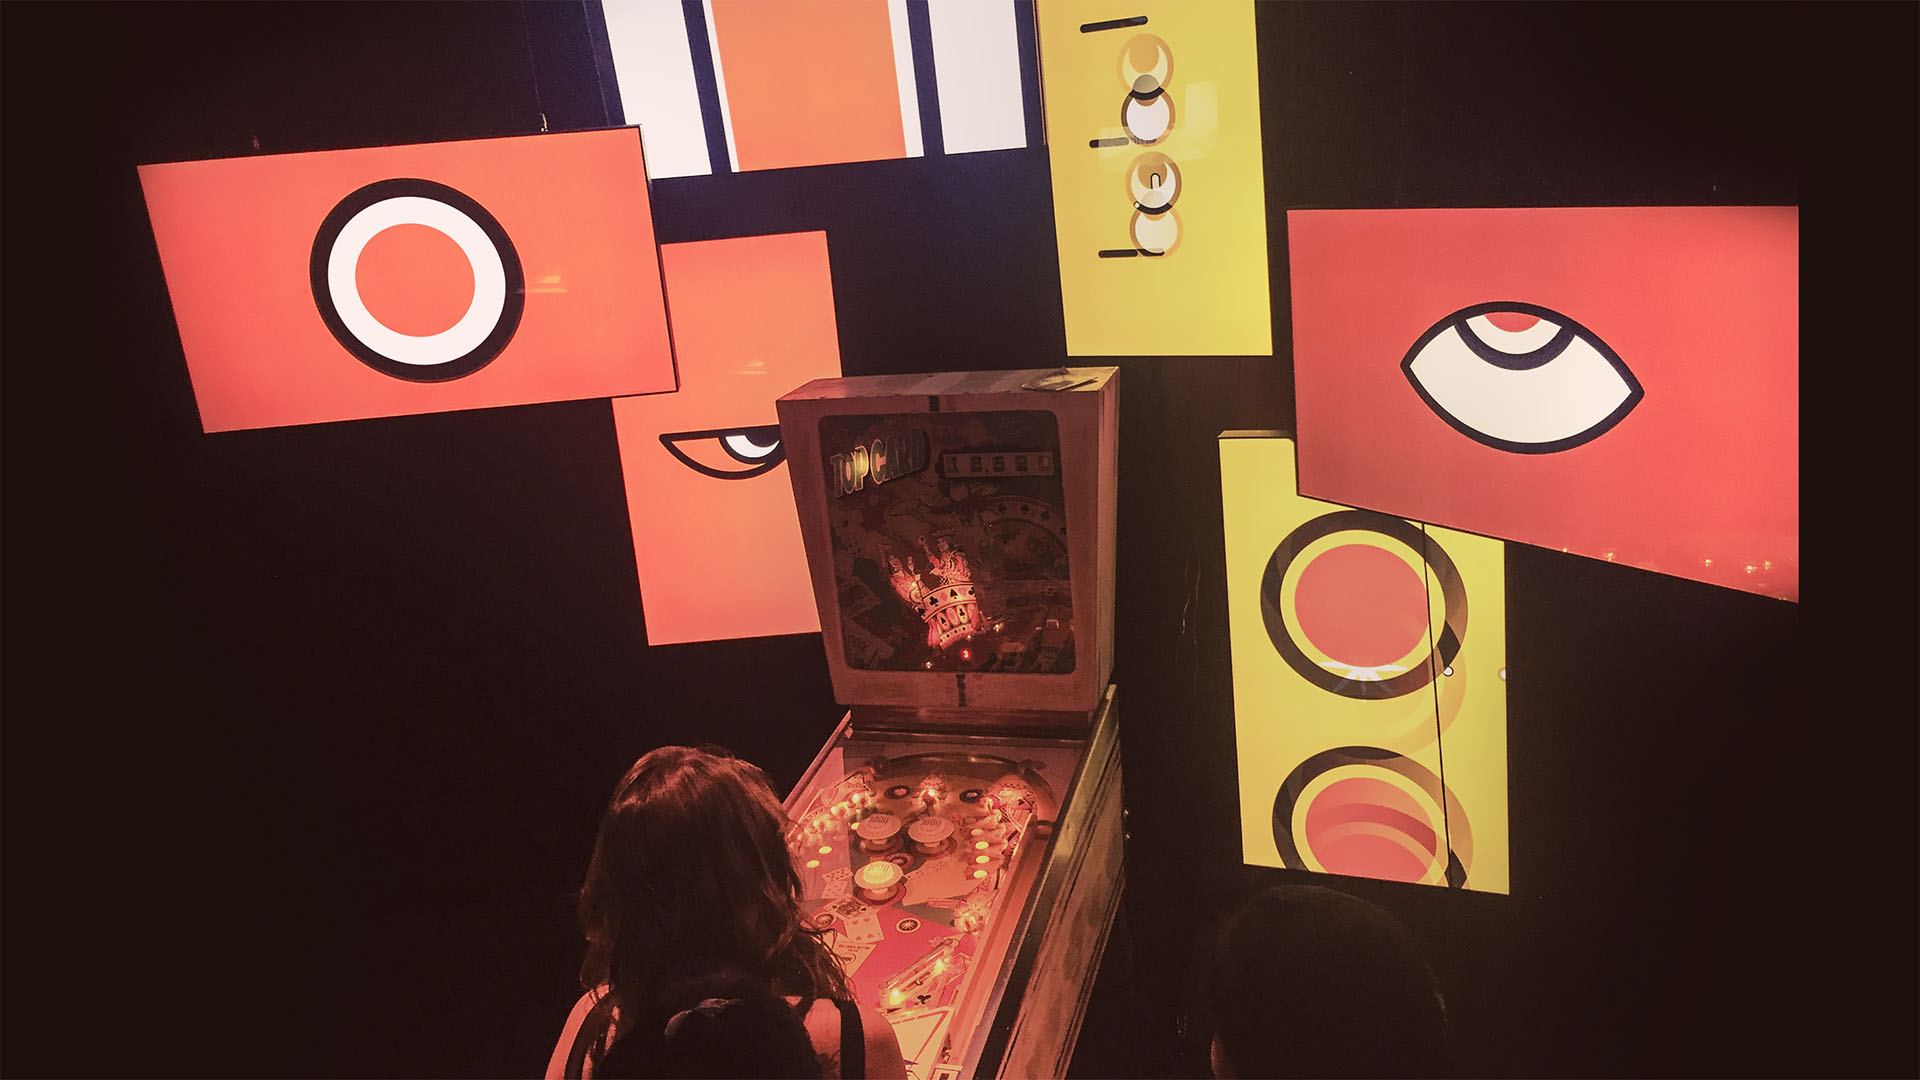 Pinball Performance - Sensors installed inside the machine triggered custom sounds and animations